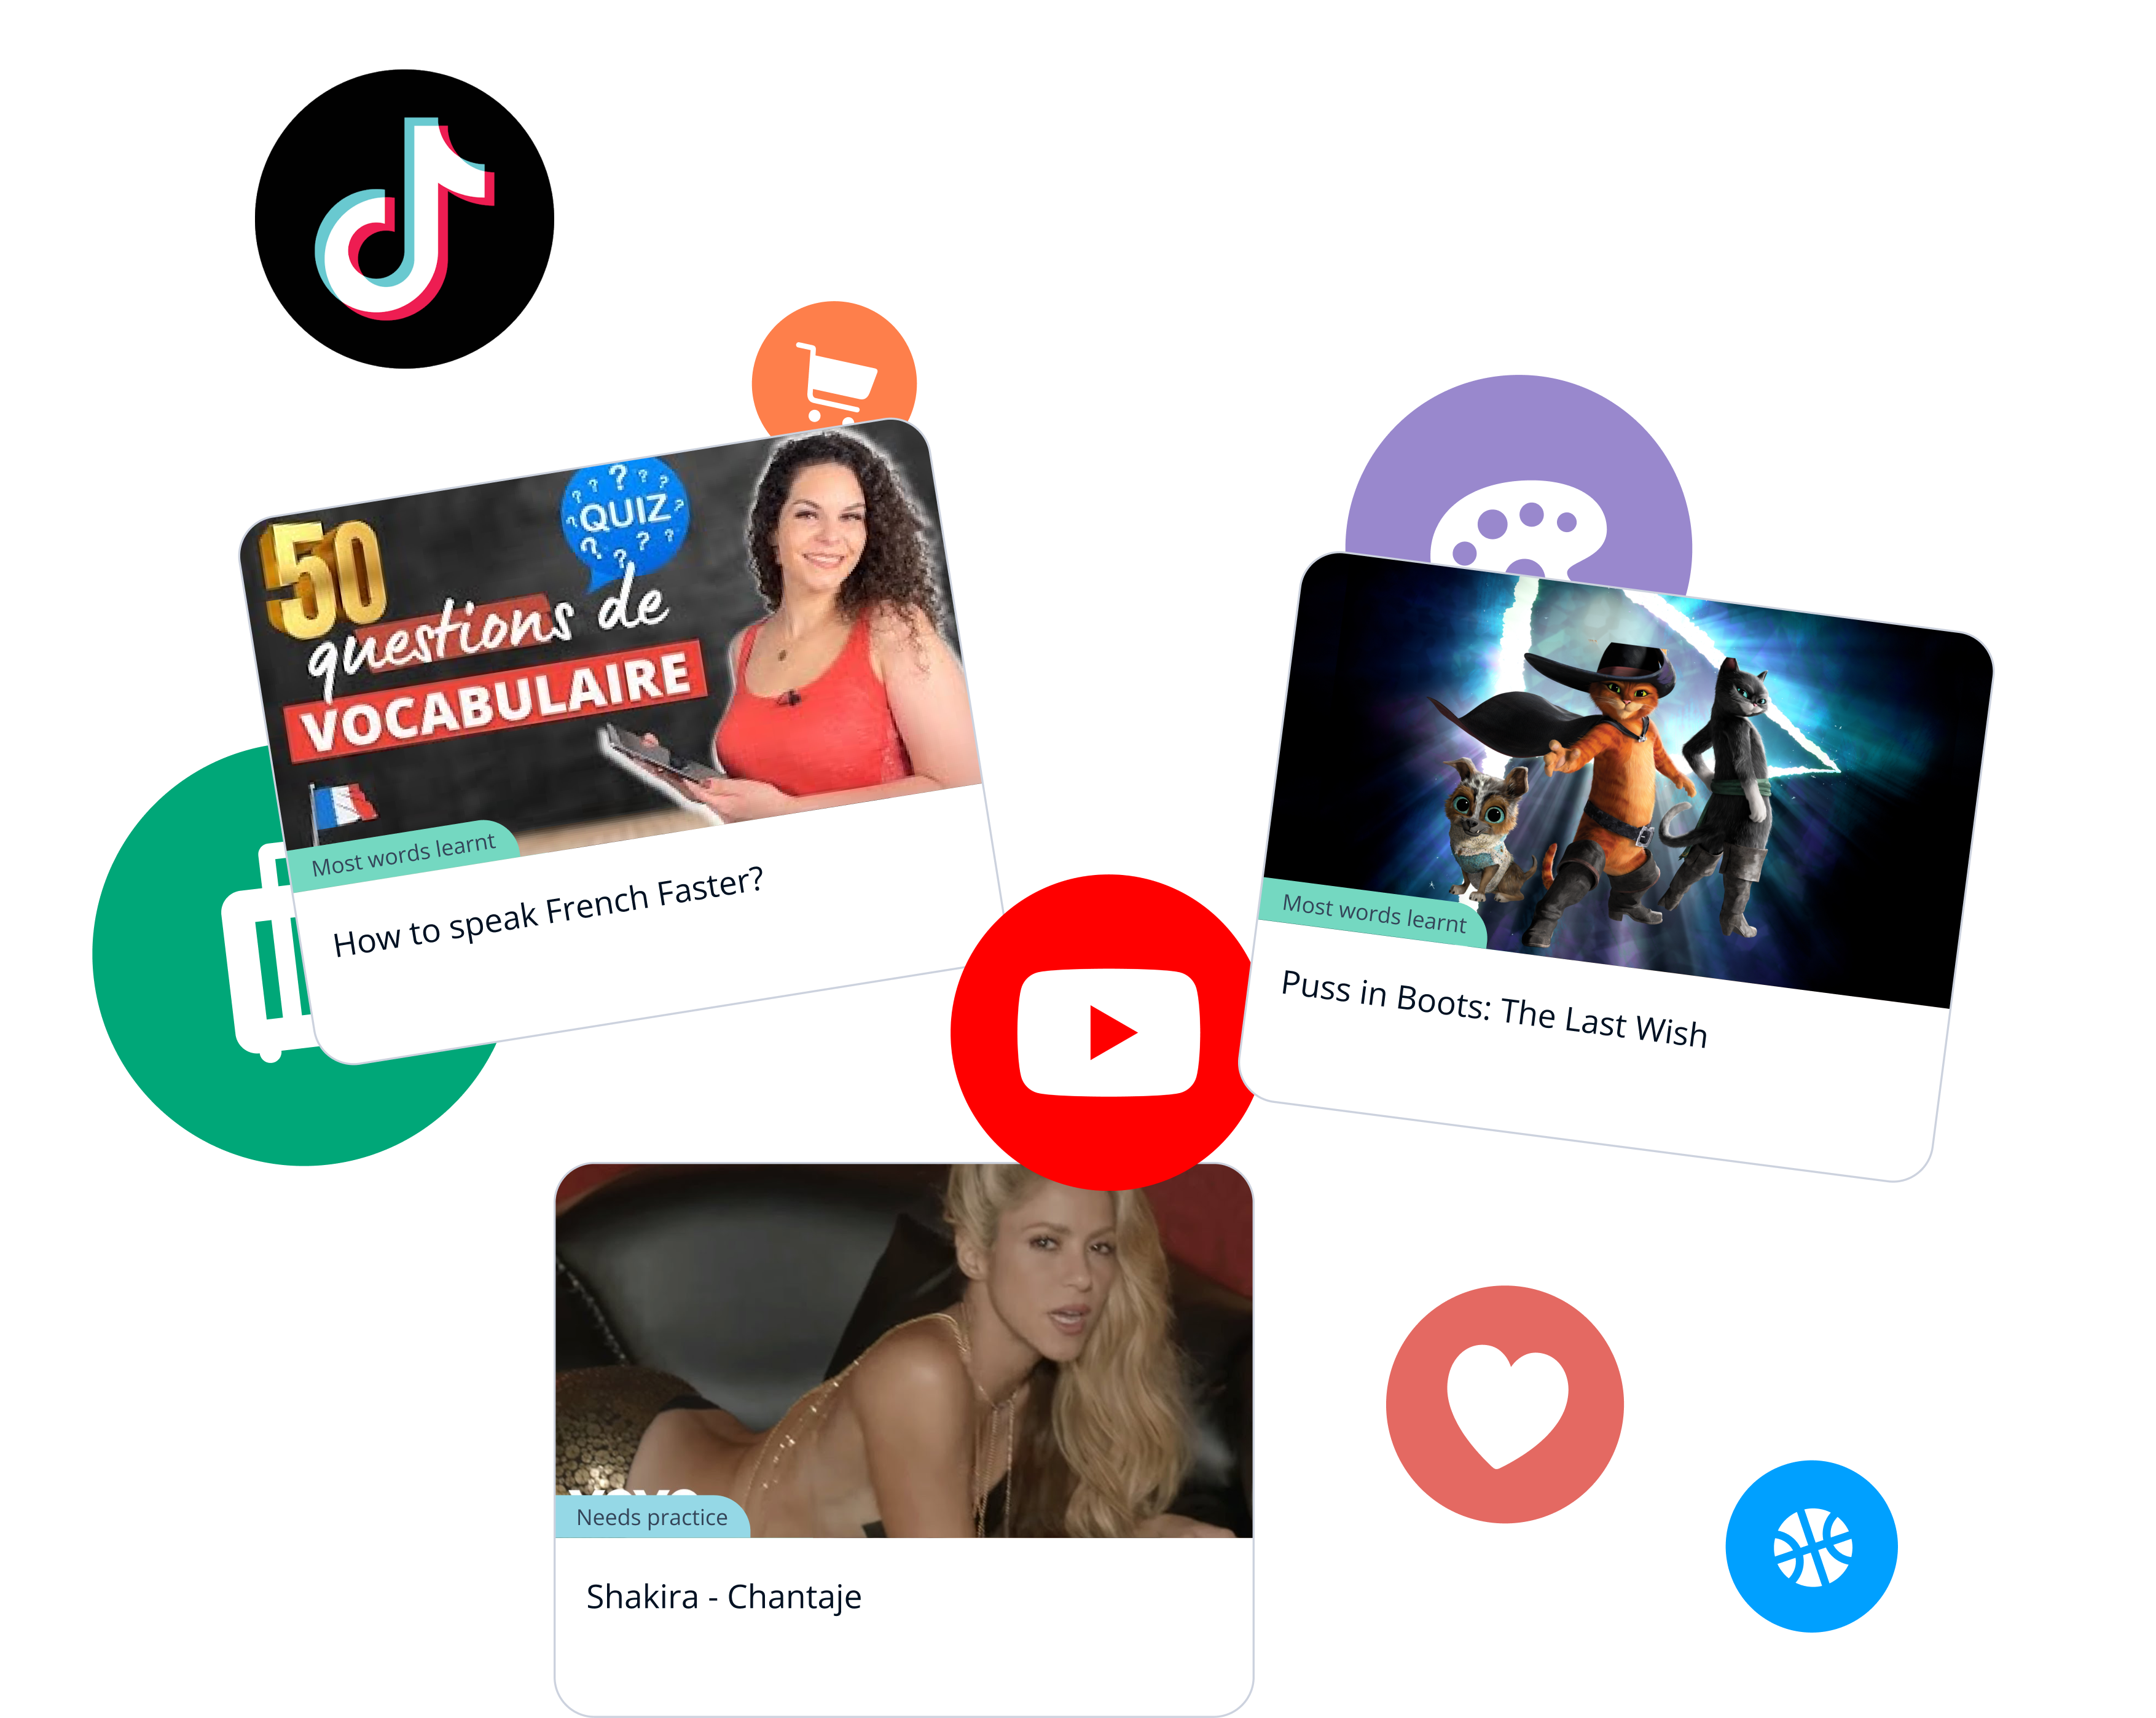 Three images showing media content from youtube and tiktok